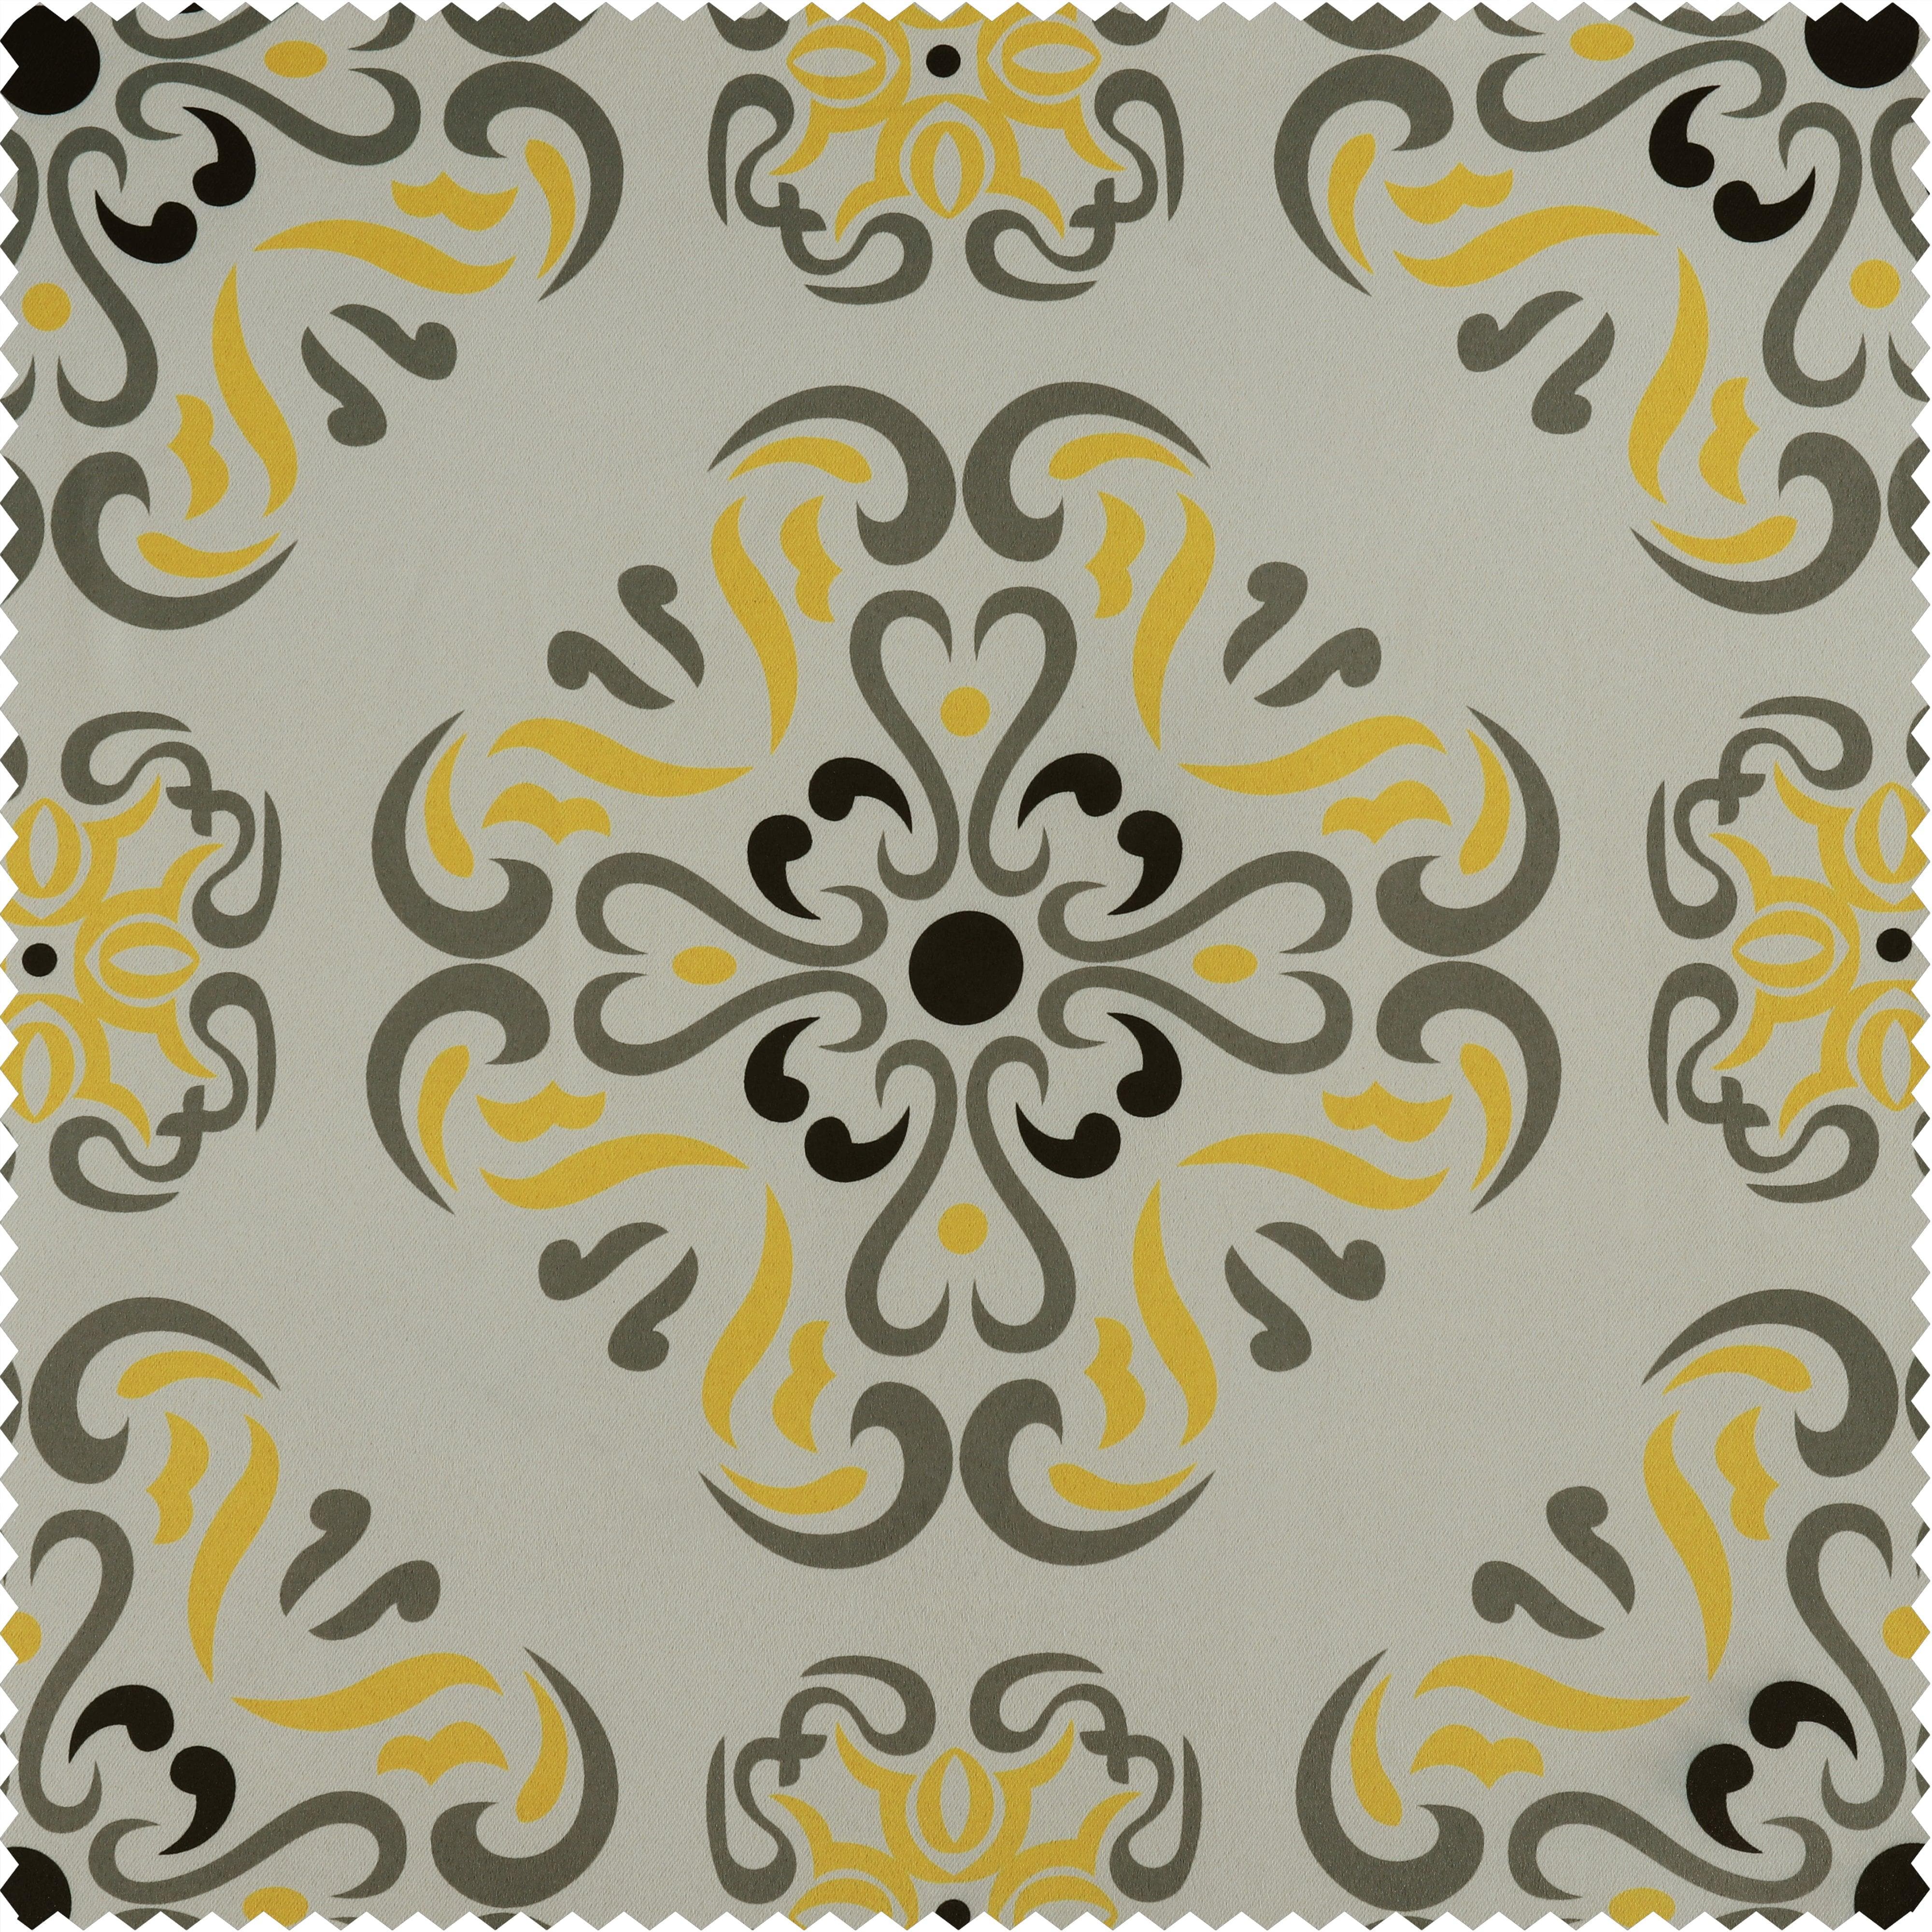 Soliel Yellow Grey Printed Polyester Swatch